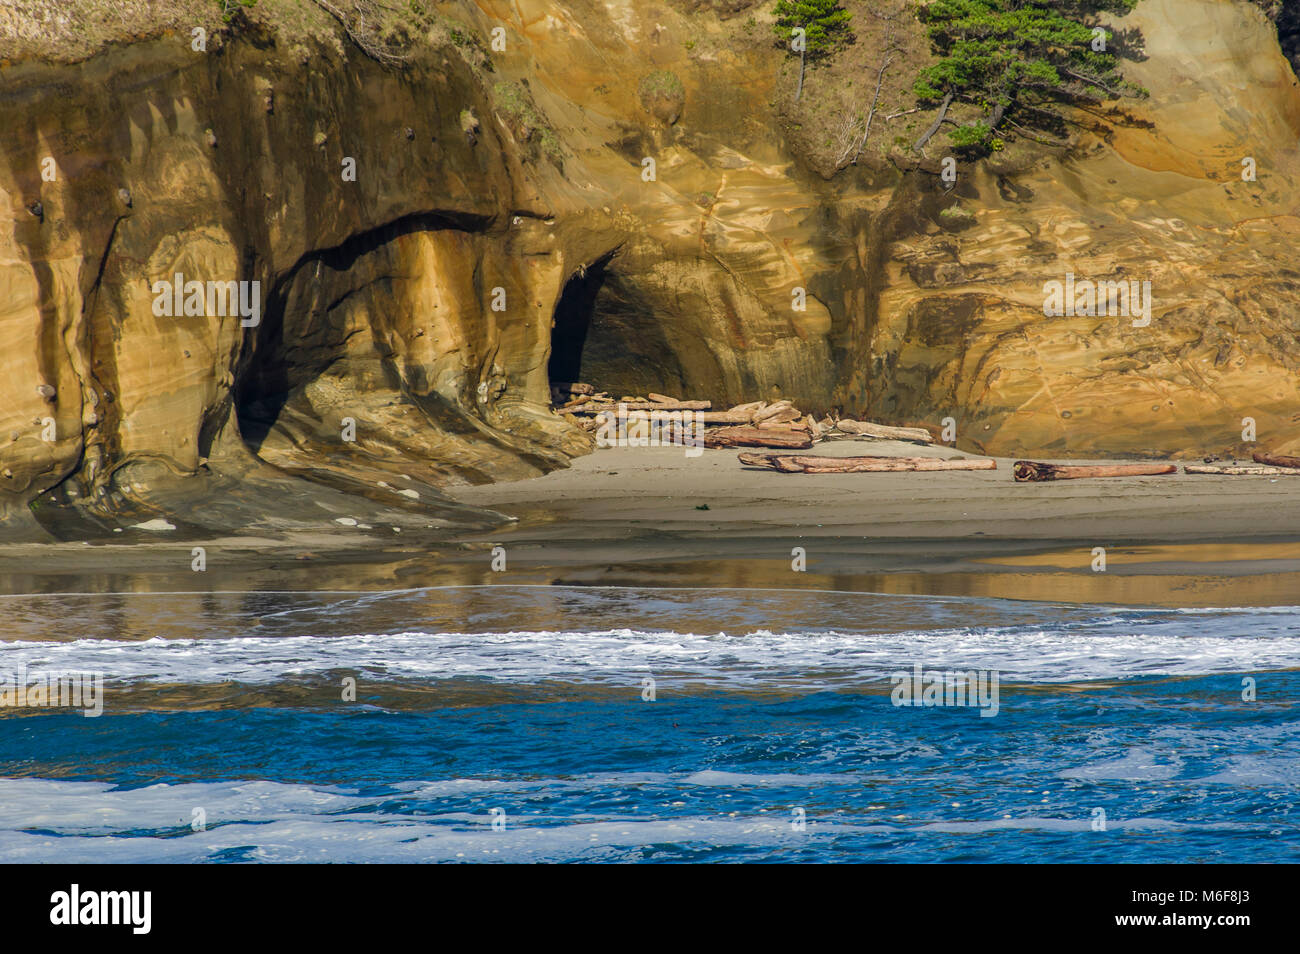 Pacific Ocean beach with cave and flotsam.  Oregon Stock Photo